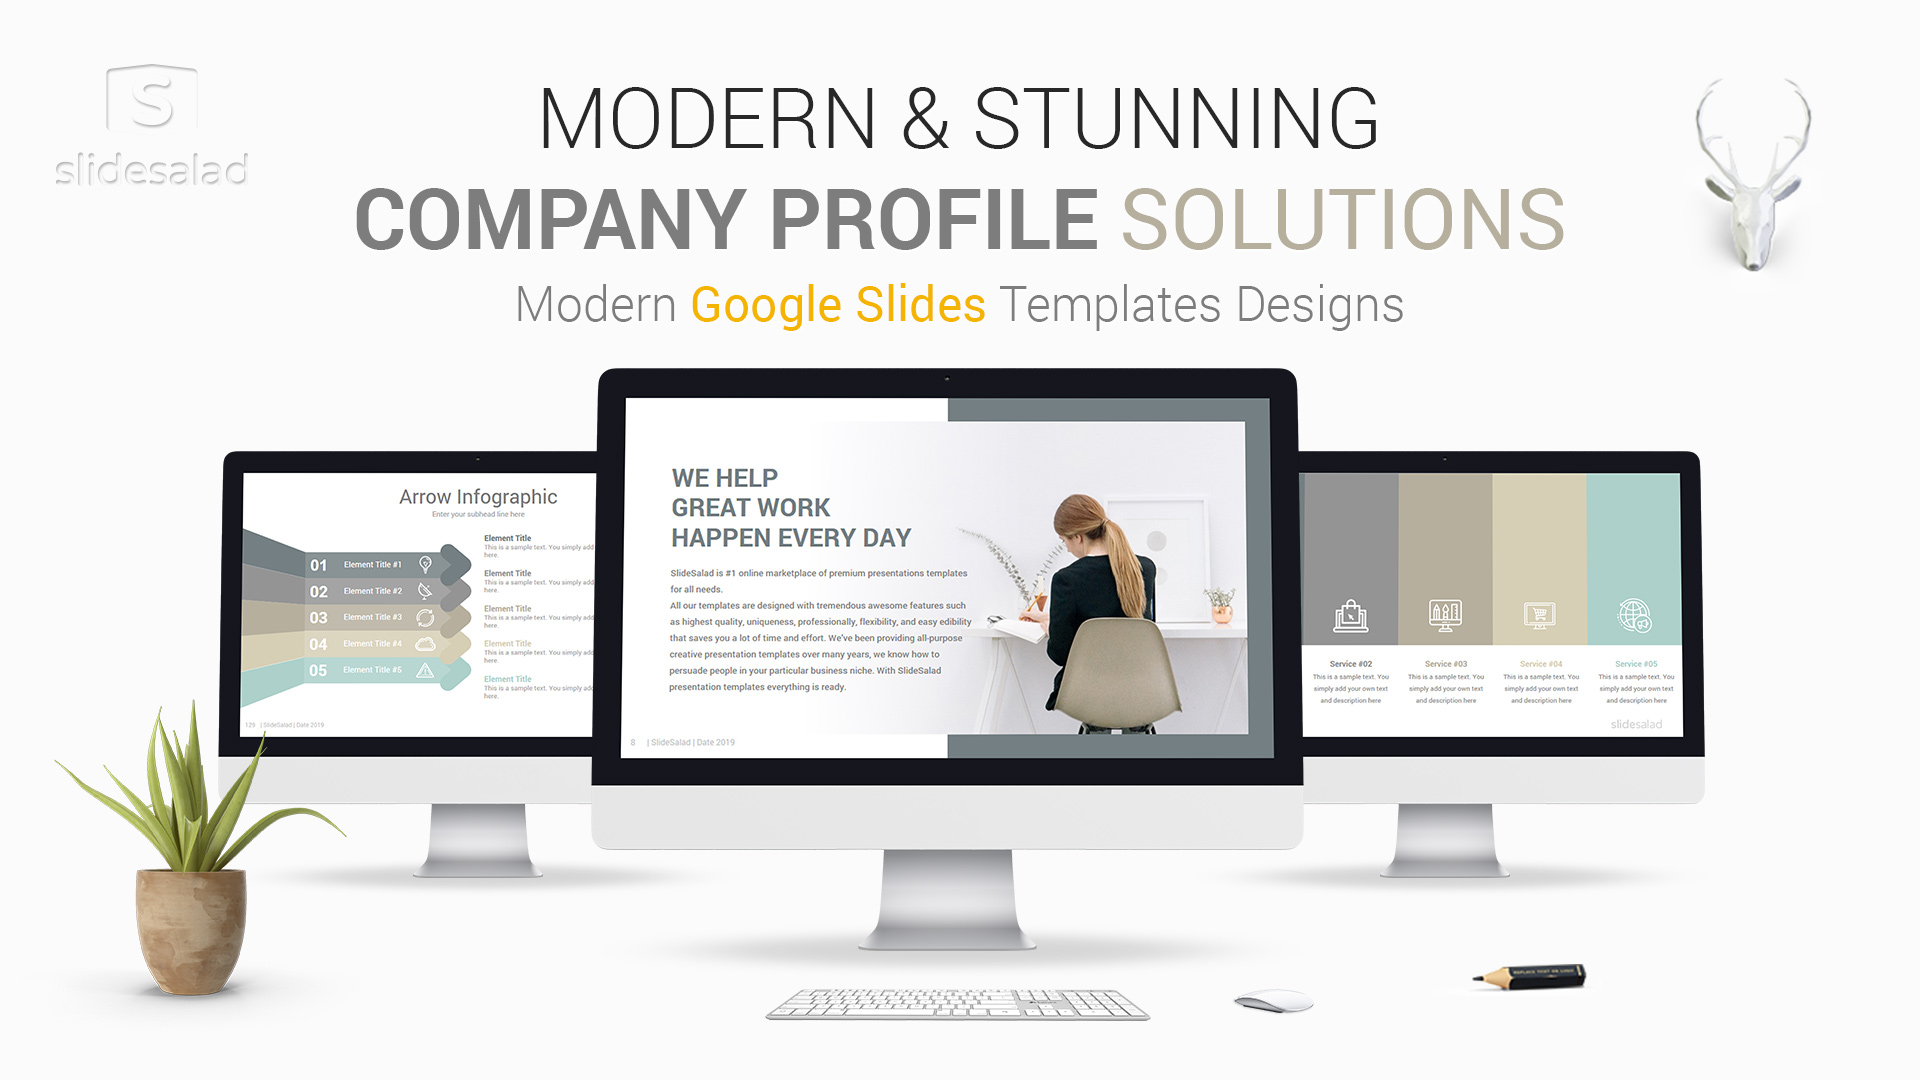 Modern Company Profile Google Slides Template Designs - Top Premium Google Slides Template for Any Type of Company Profiles